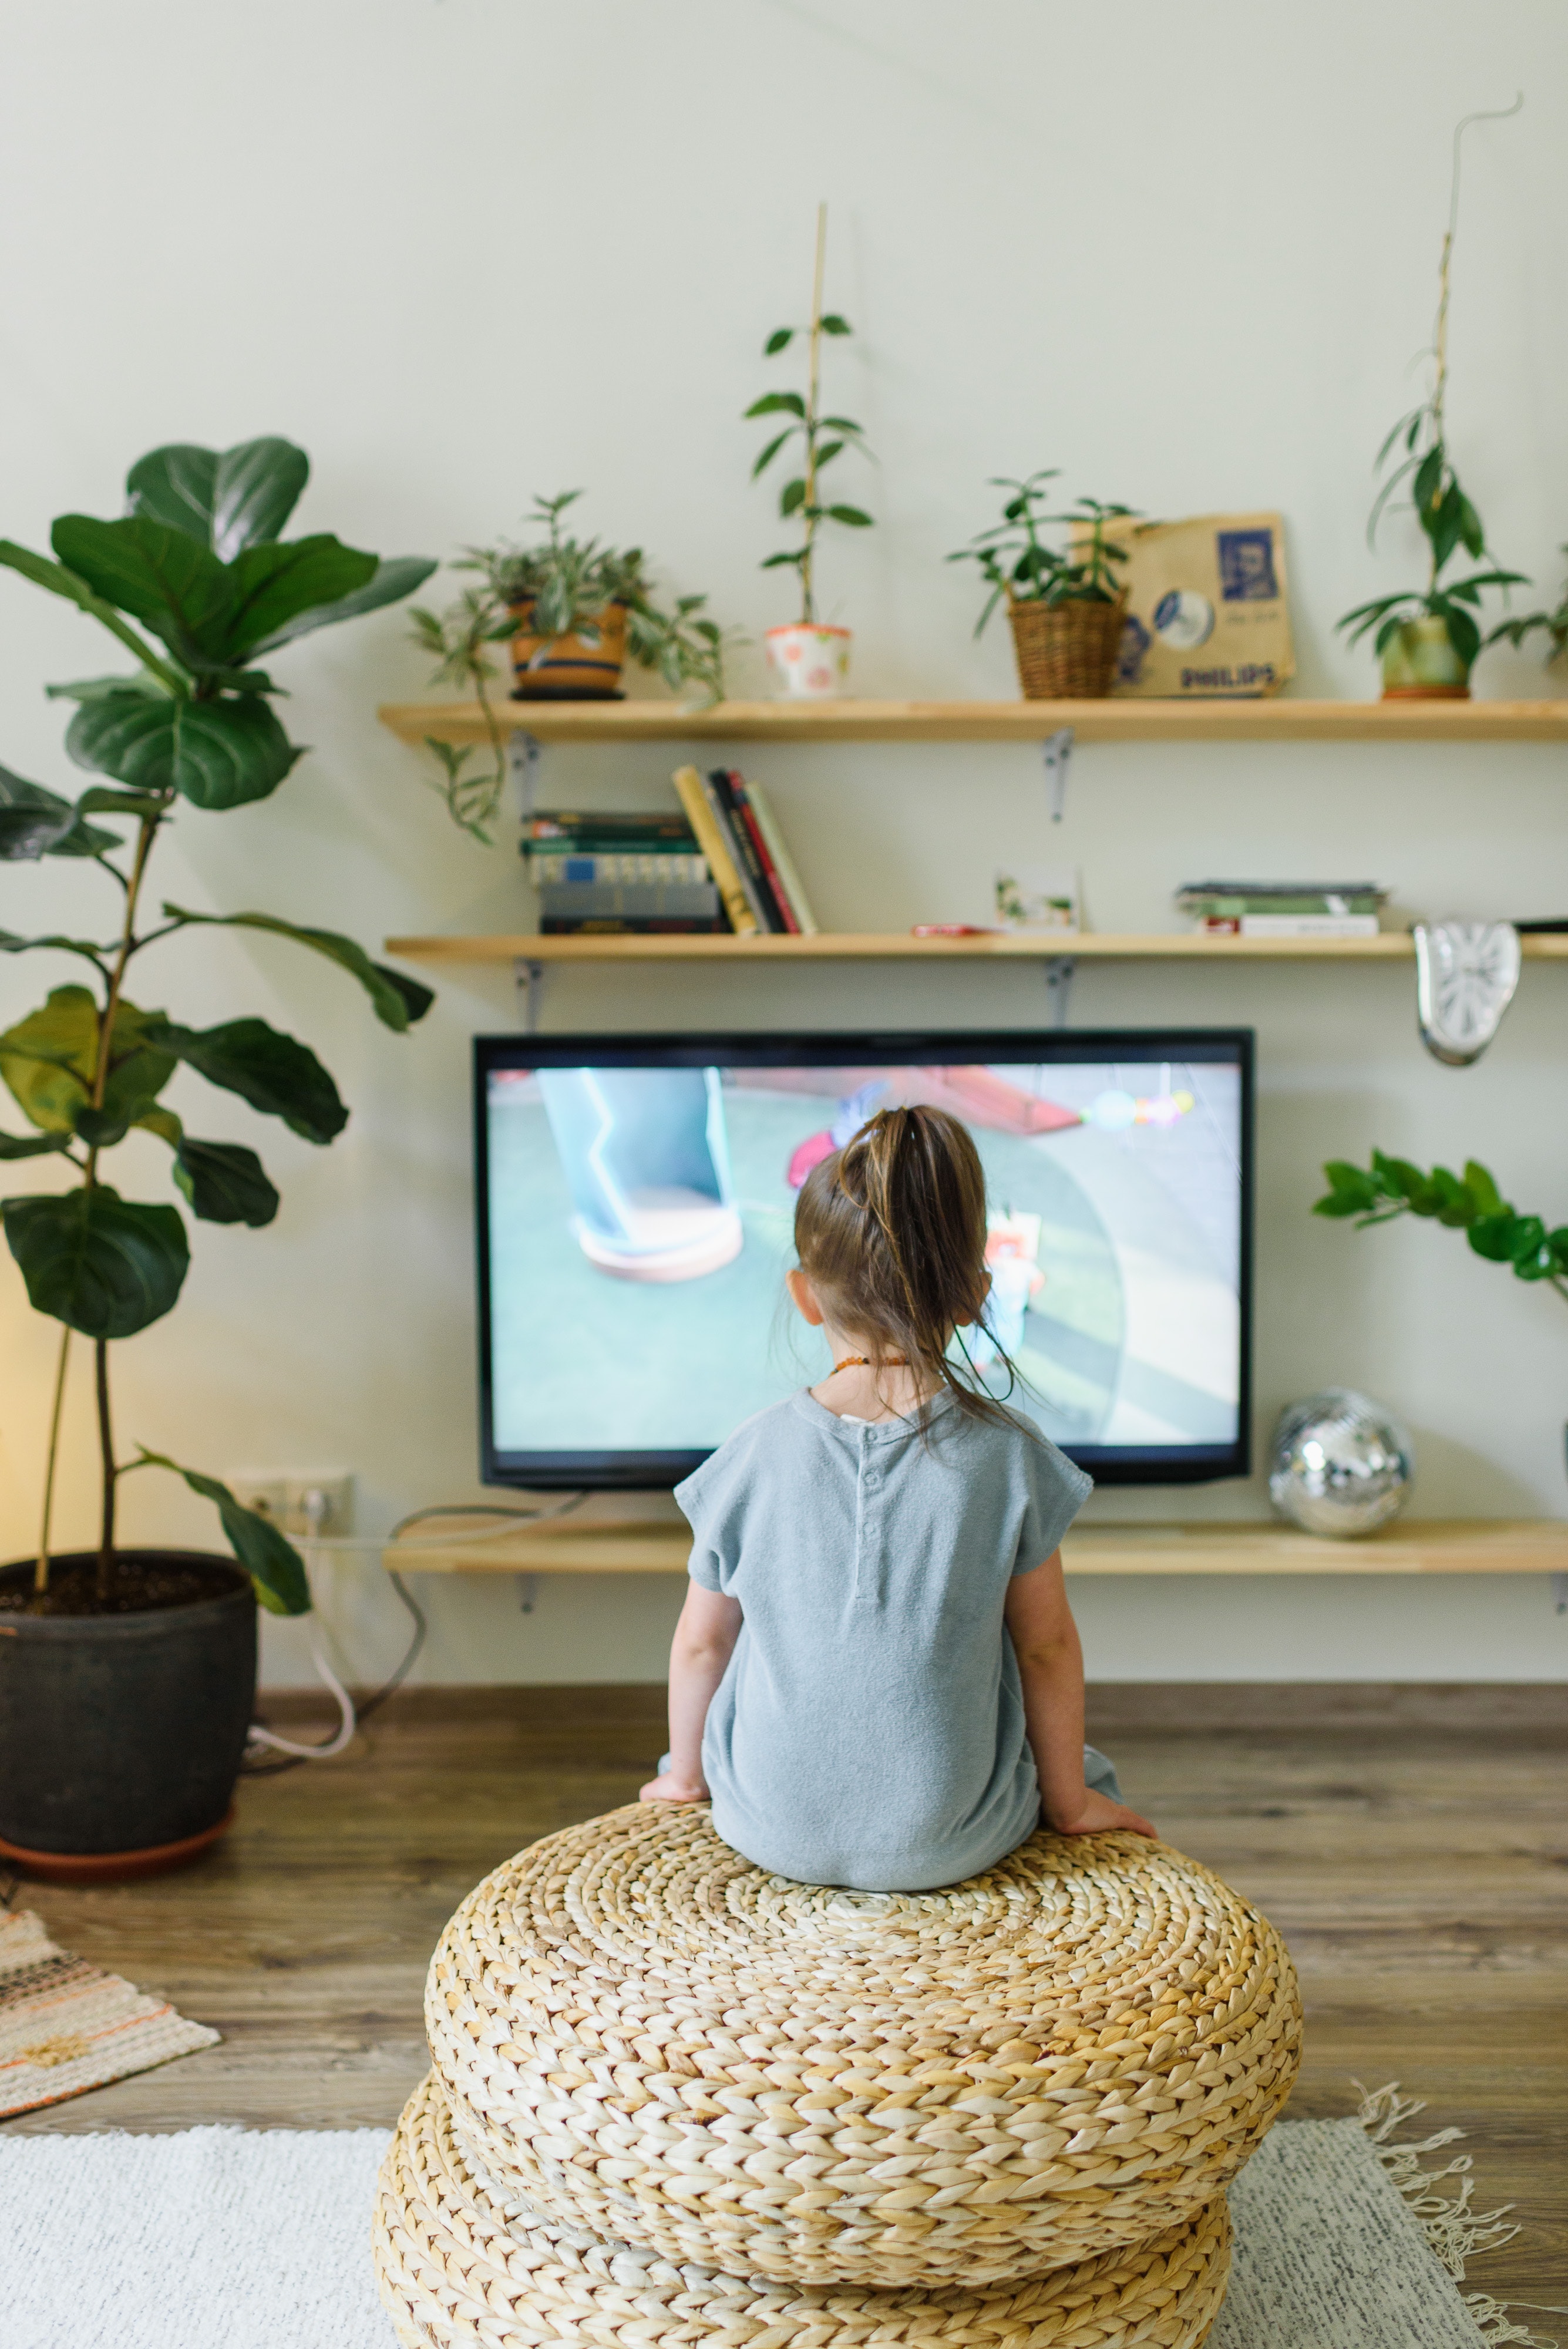 Image shows the back of a young girl, She is sat in a lounge watching TV.